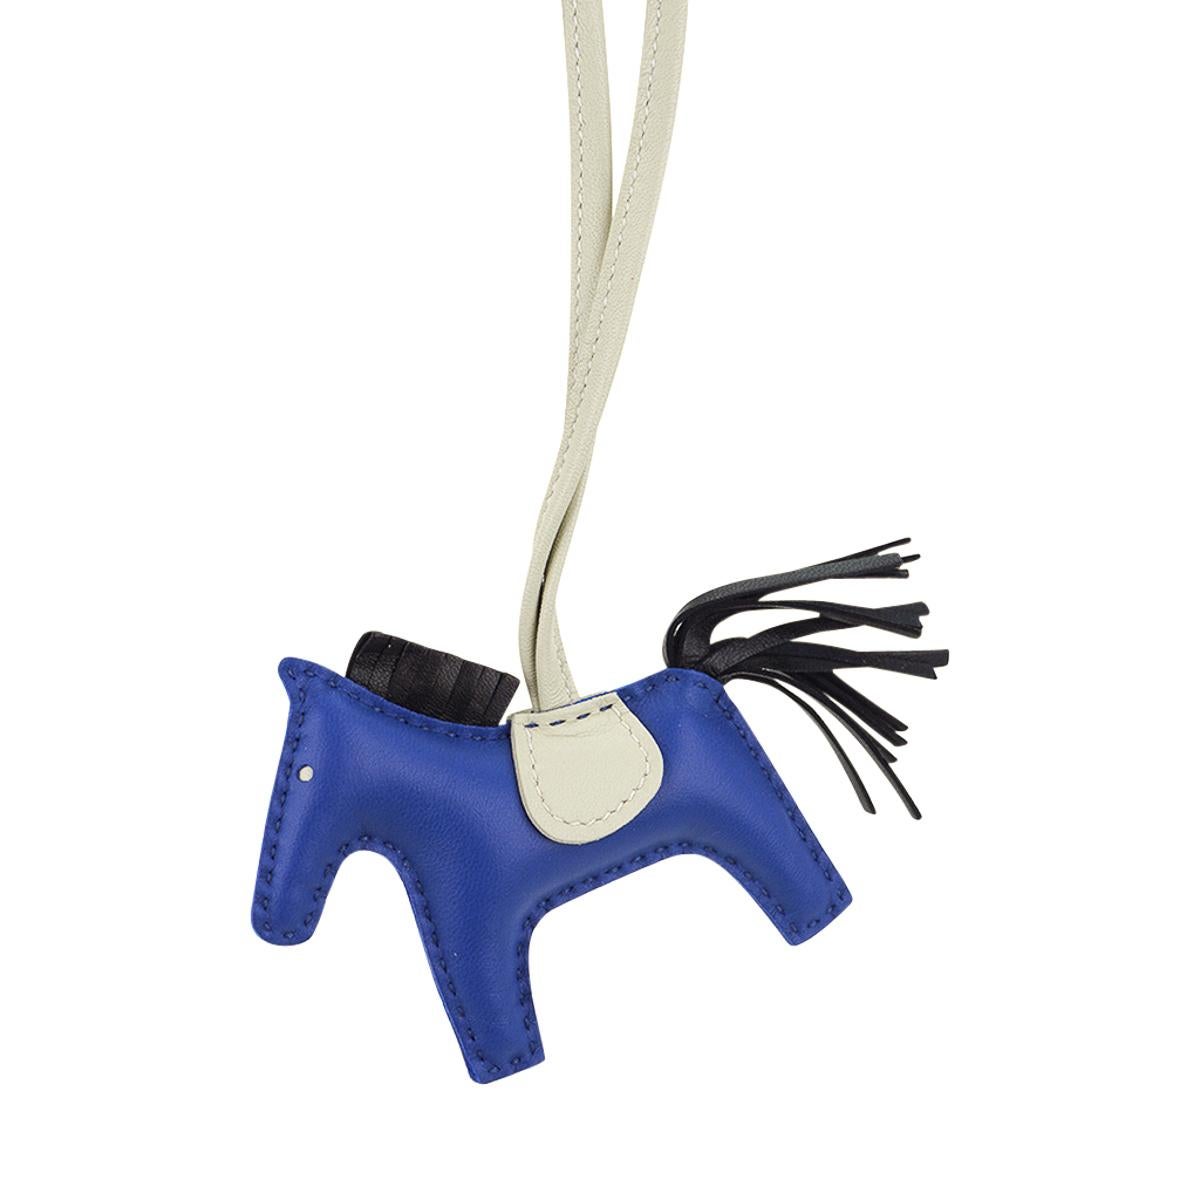 Mightychic offers an Hermes PM Rodeo bag charm featured in Blue de France, Craie and Black.
Charming and playful she easily adorns a myriad bag colours in your fabulous collection.
Skin is Milo lambskin.
Signature HERMES PARIS MADE IN FRANCE is